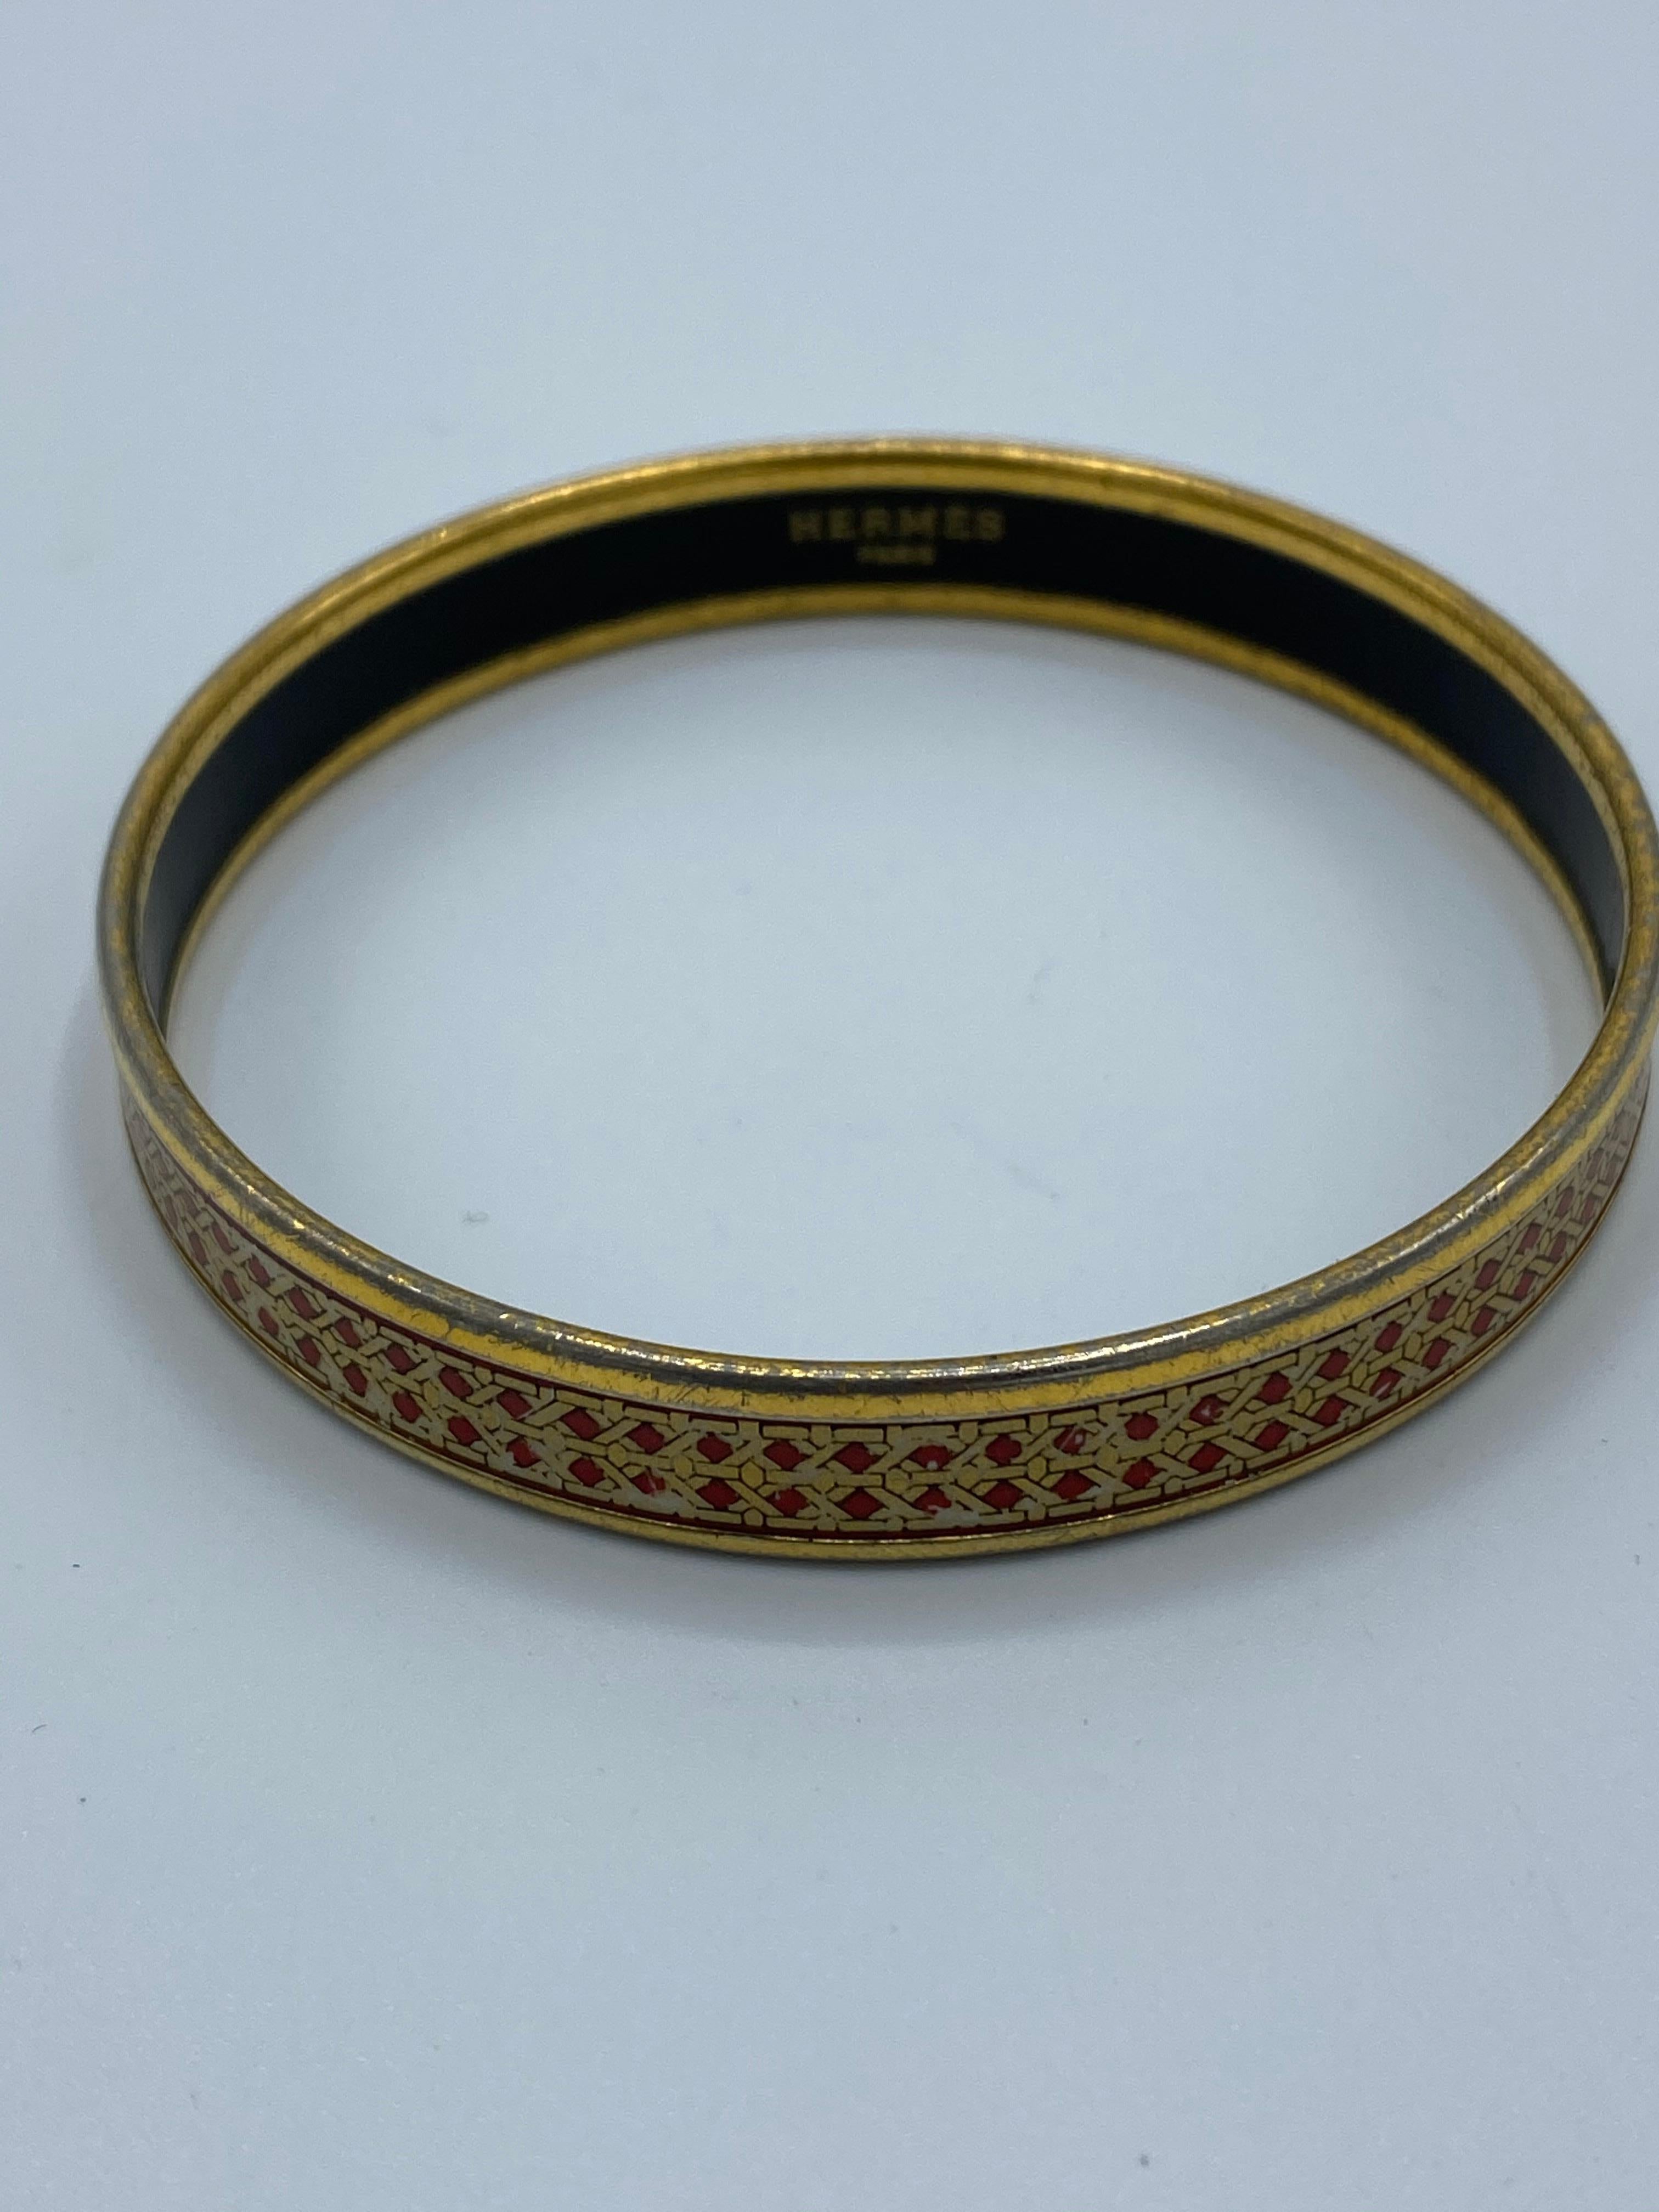 Product details:

Featuring gold tone hardware, enamel , red and gold geometric pattern design. Signed Hermes Paris. Made in Austria. Comes with the original Hermes box. Inner circumference is 7.5